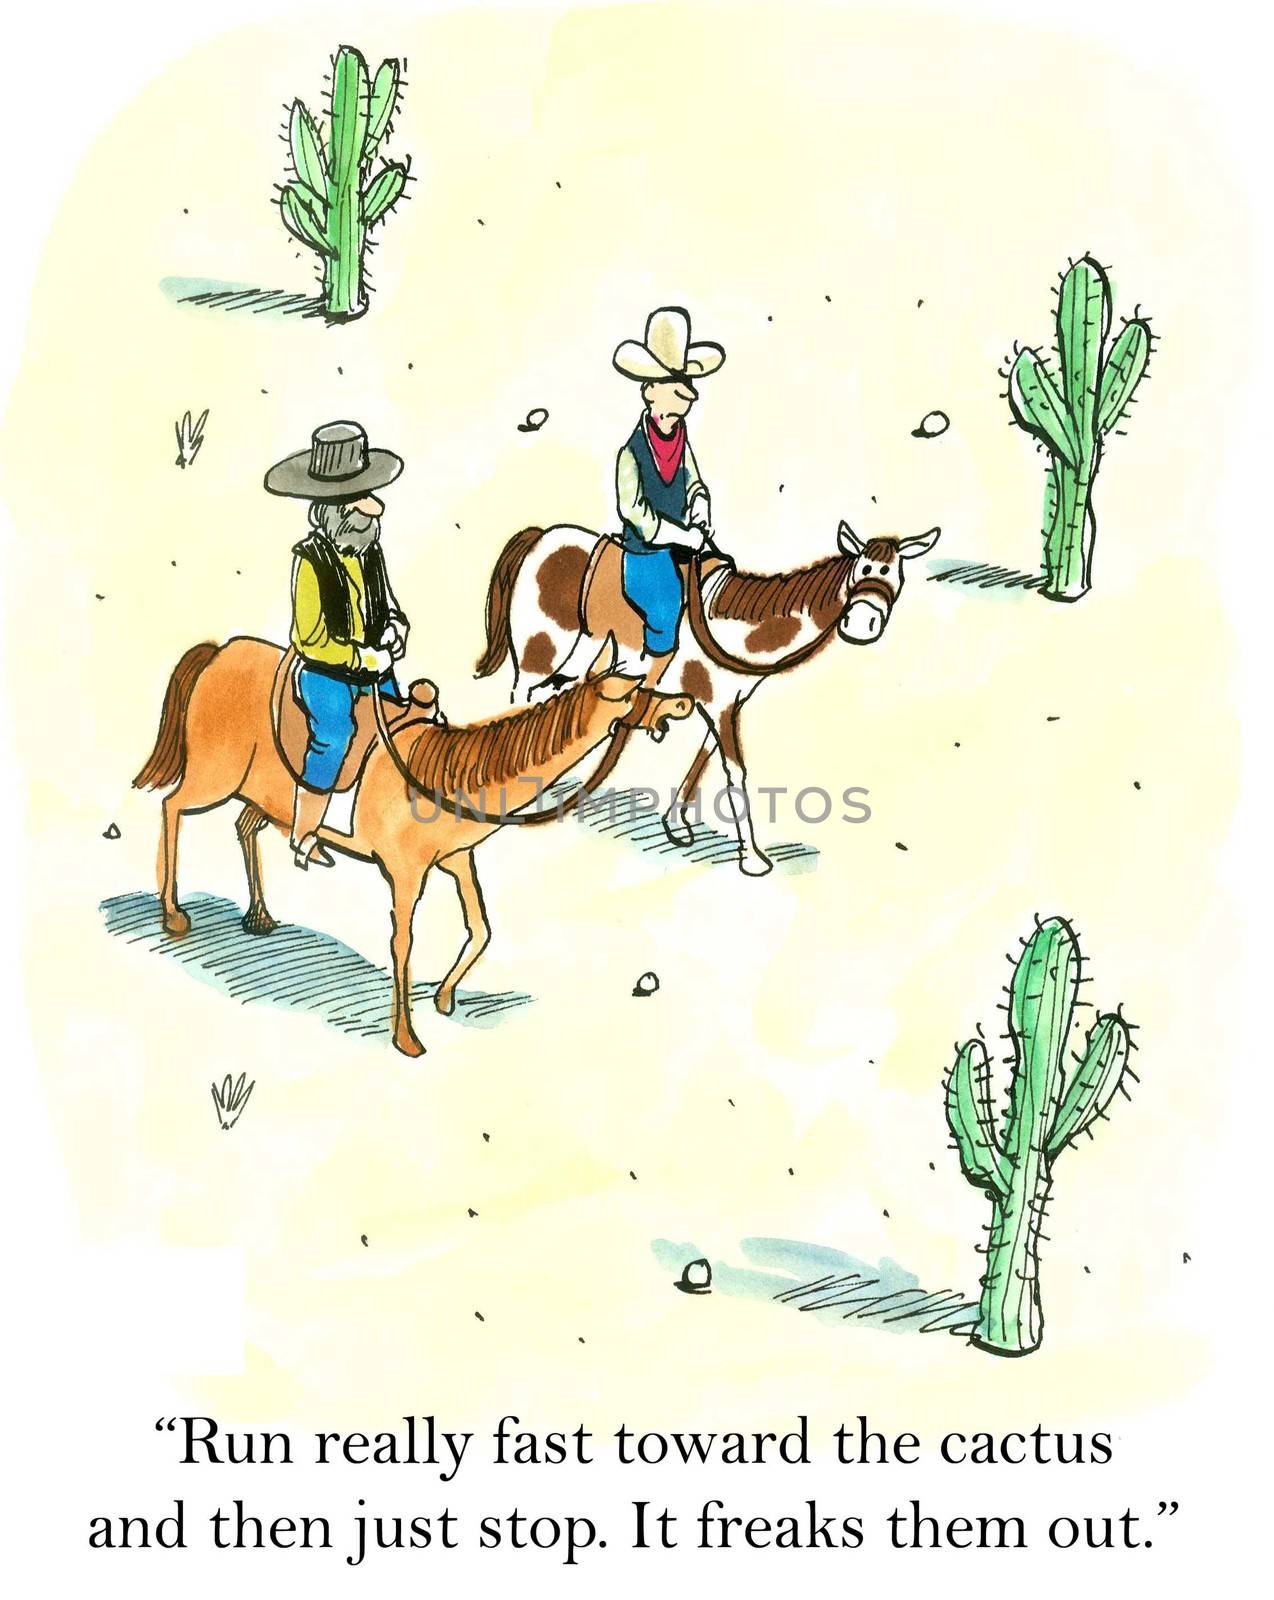 "Run really fast toward the cactus and then just stop. Freaks them out."